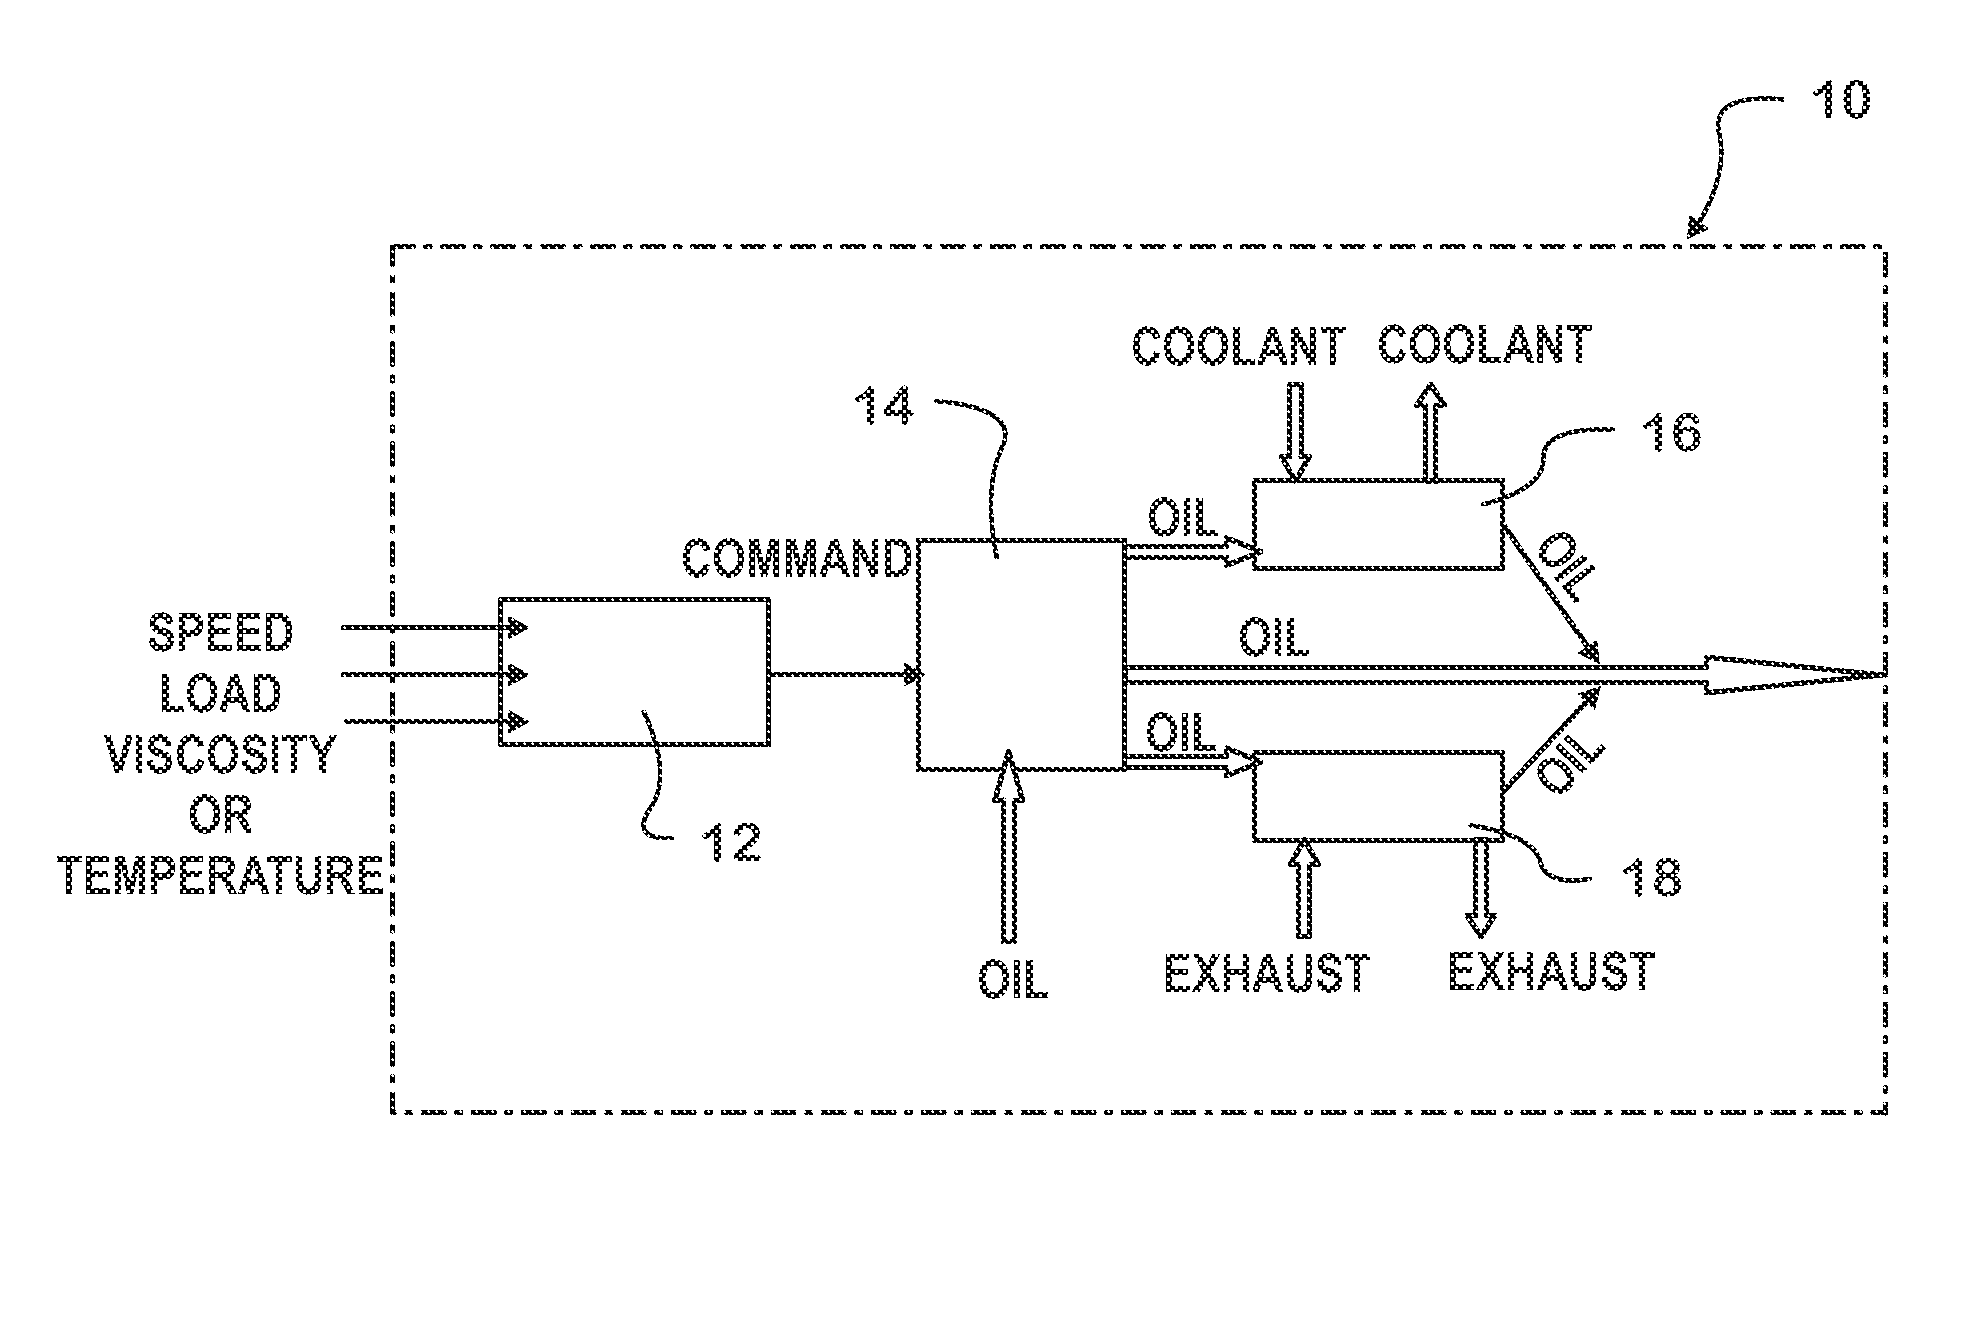 Oil property management system and method for internal combustion engine fuel economy and minimum wear rates